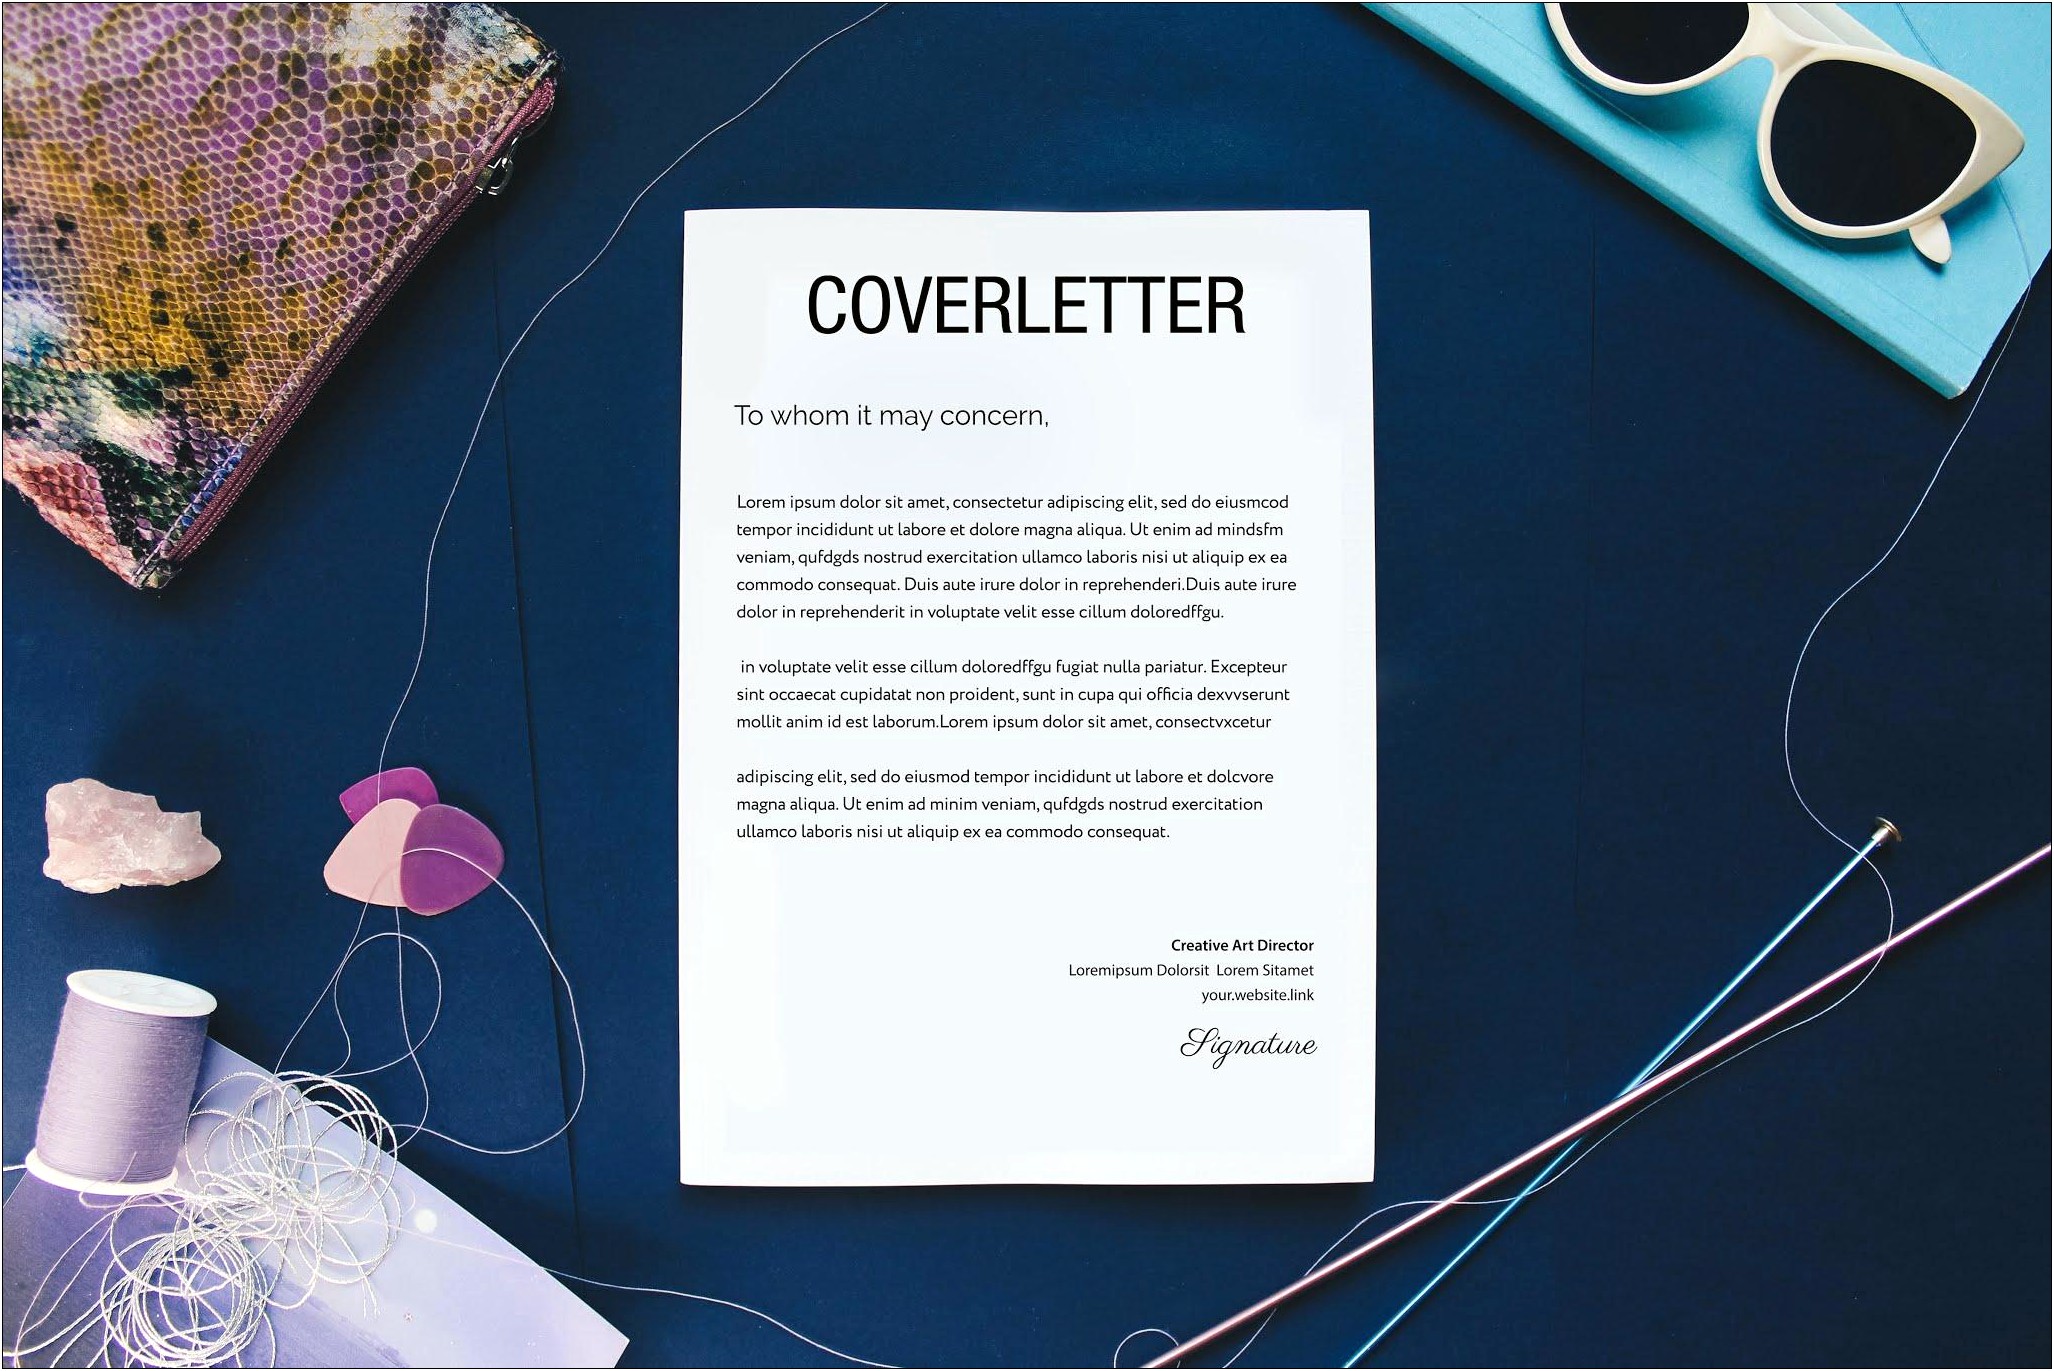 Does Your Cover Letter Go Before Your Resume